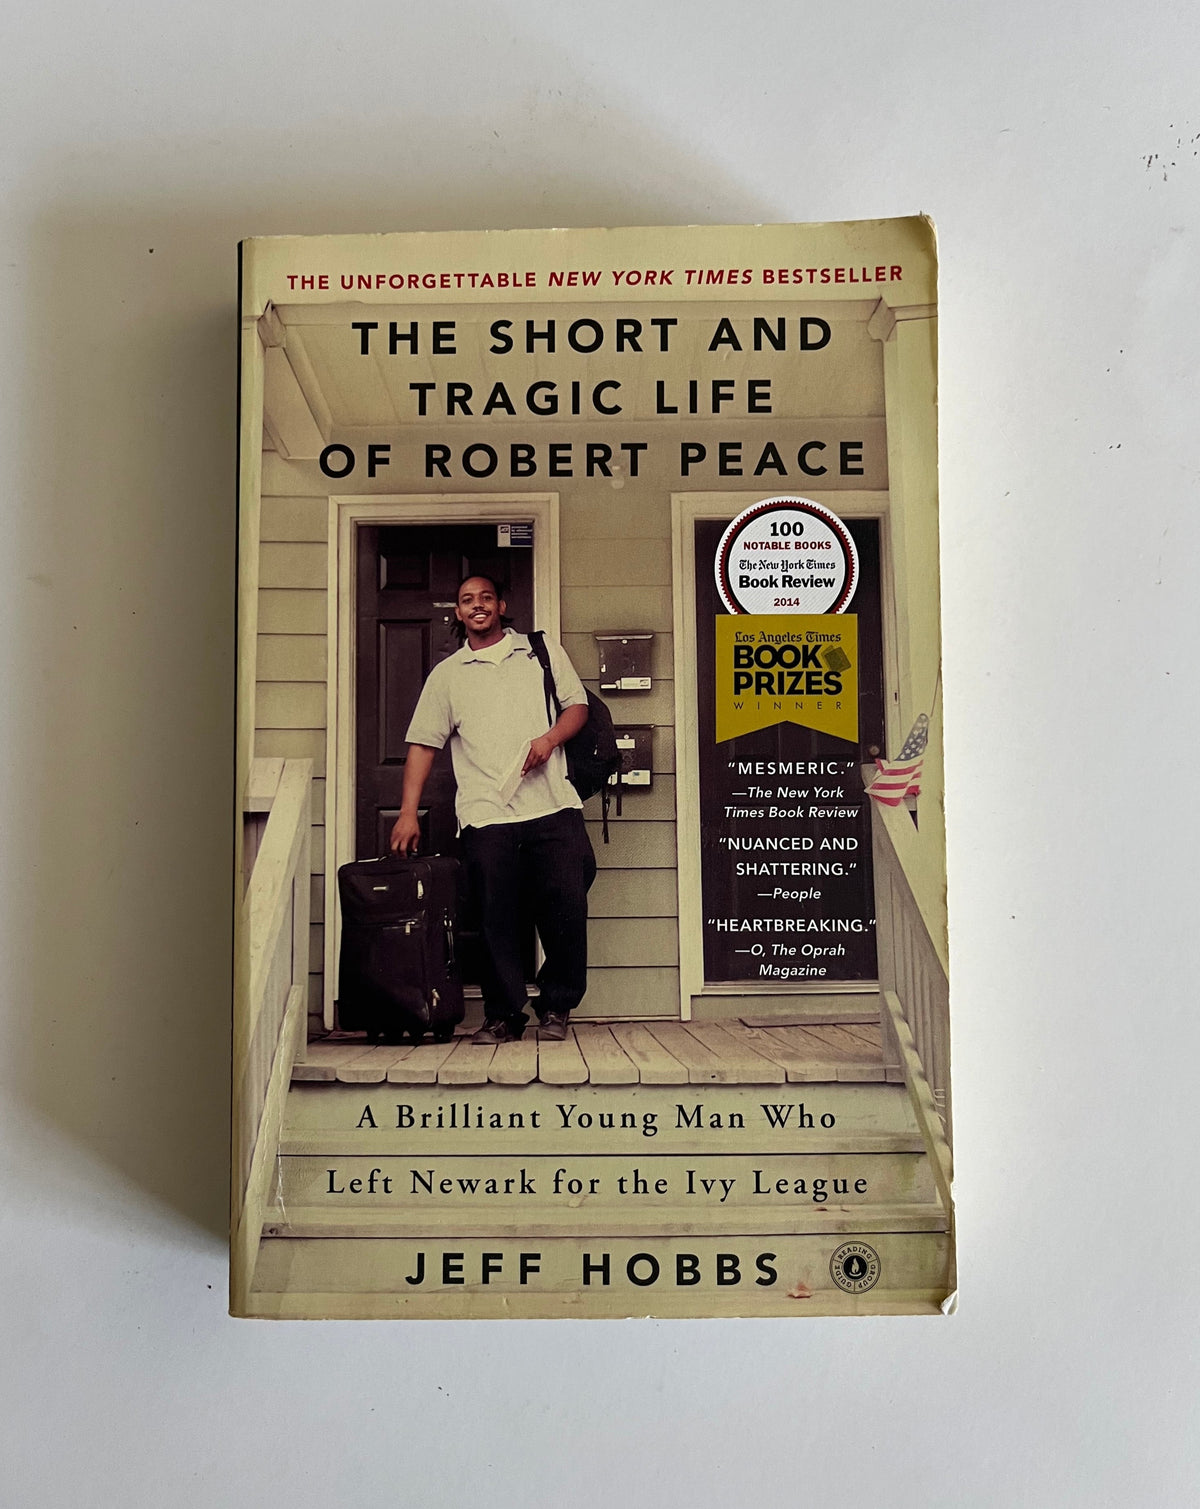 The Short and Tragic Life of Robert Peace by Jeff Hobbs